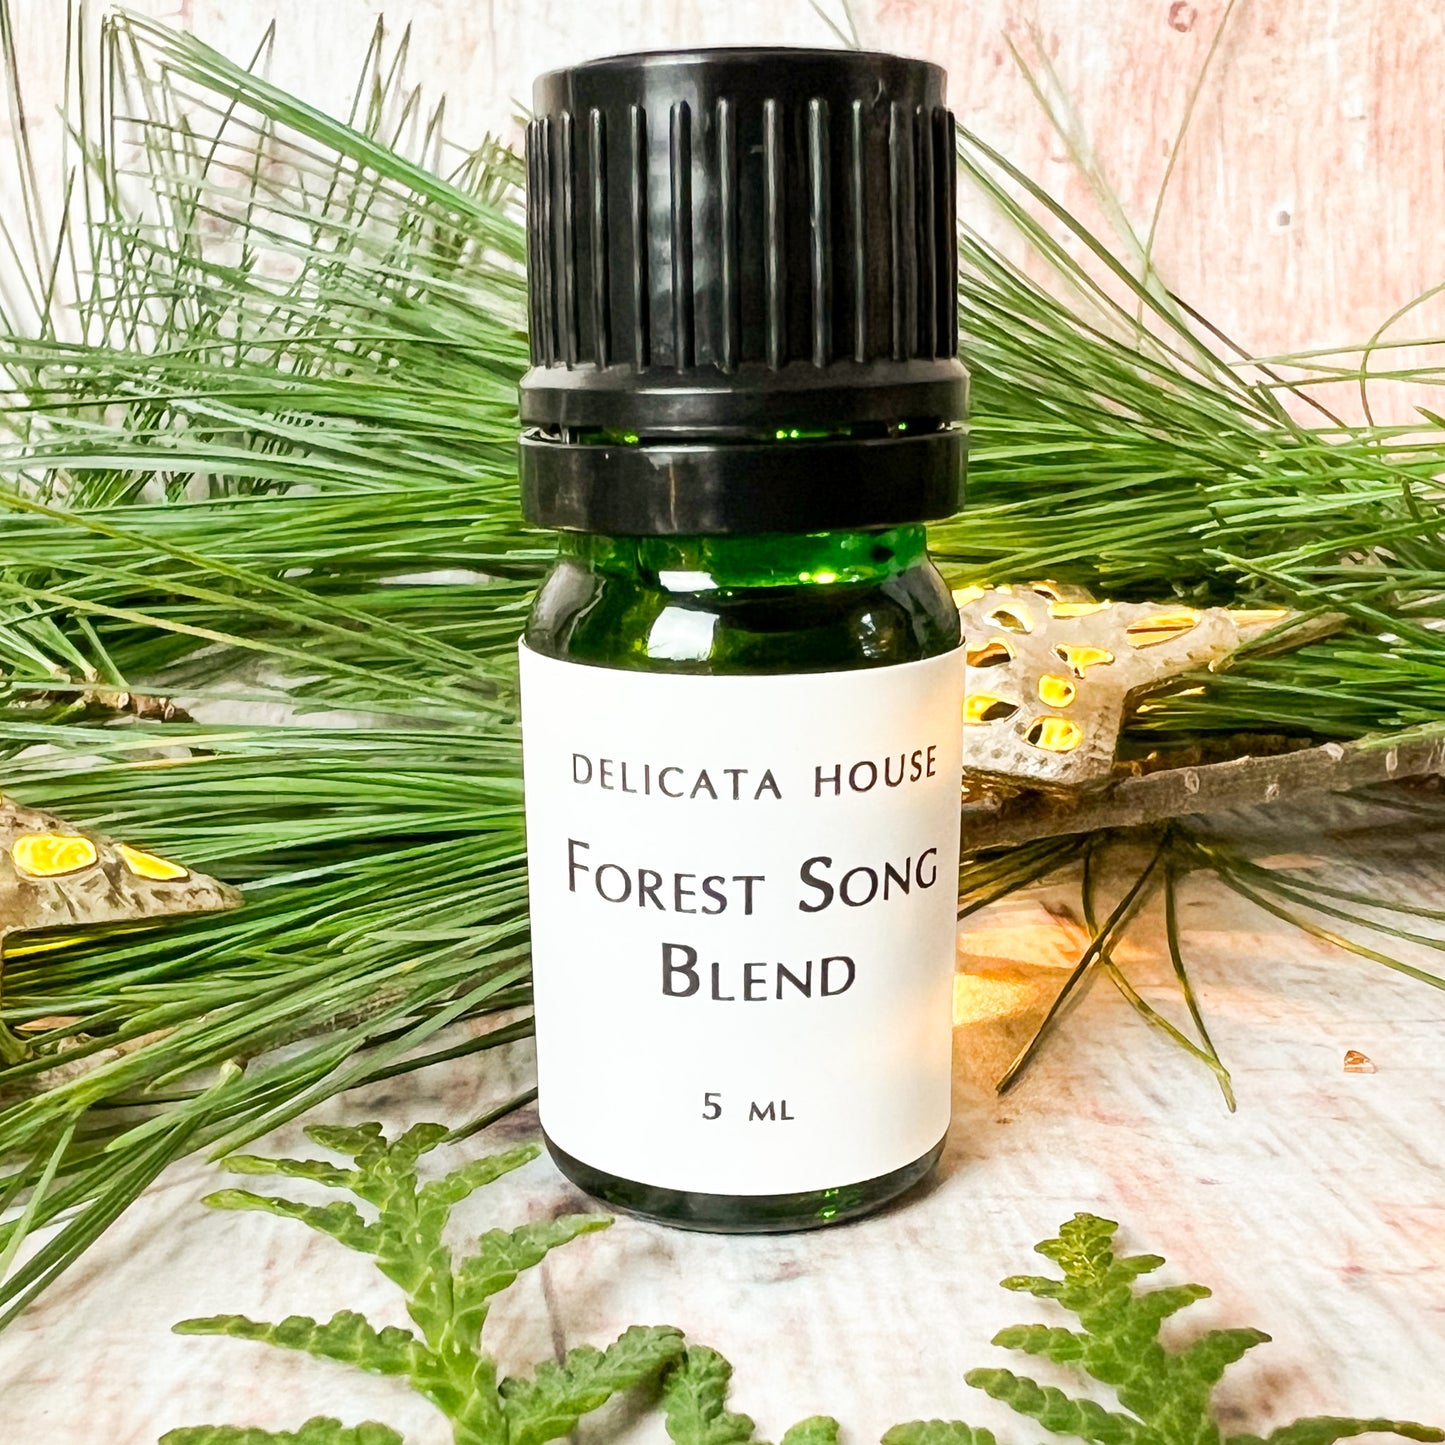 Aromatherapy Blend - Forest Song Aromatherapy Diffuser Blend - Woodsy Aromatherapy Diffuser Blend - Aromatherapy for Respiratory Wellness and Immune Boosting